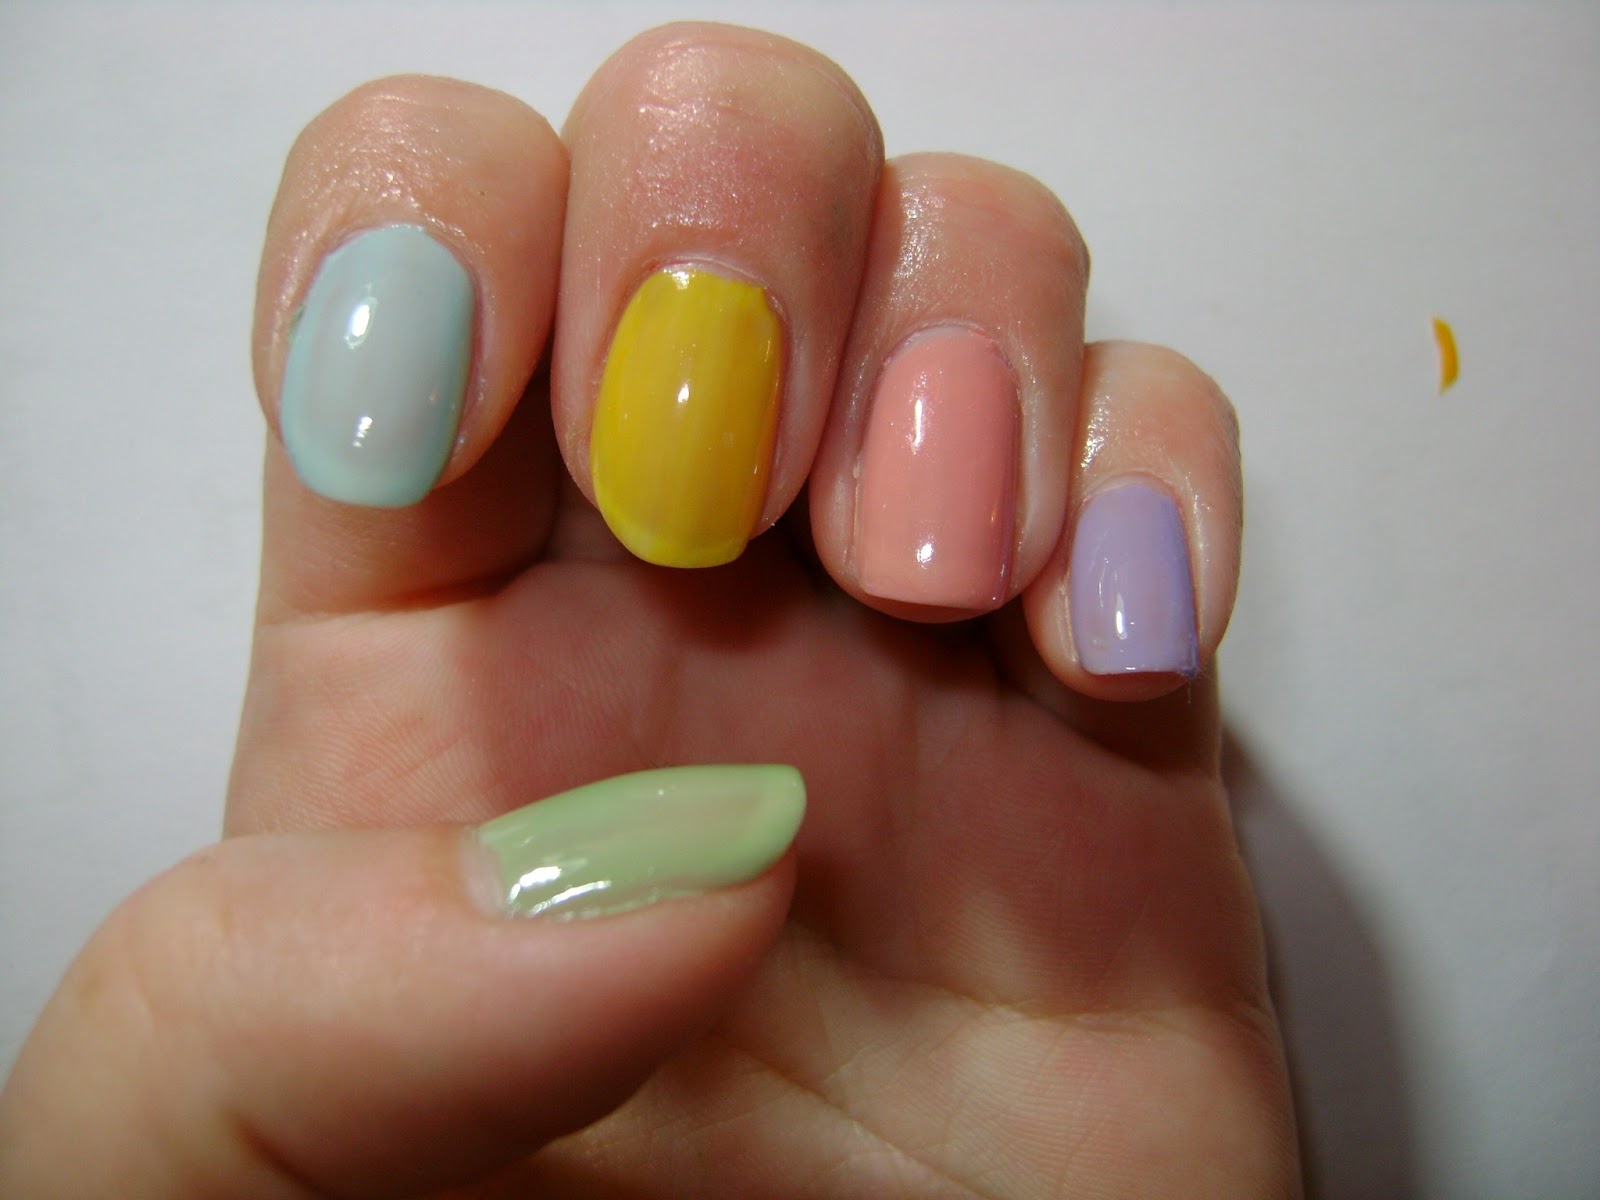 3. "Two-tone nail color" - wide 5